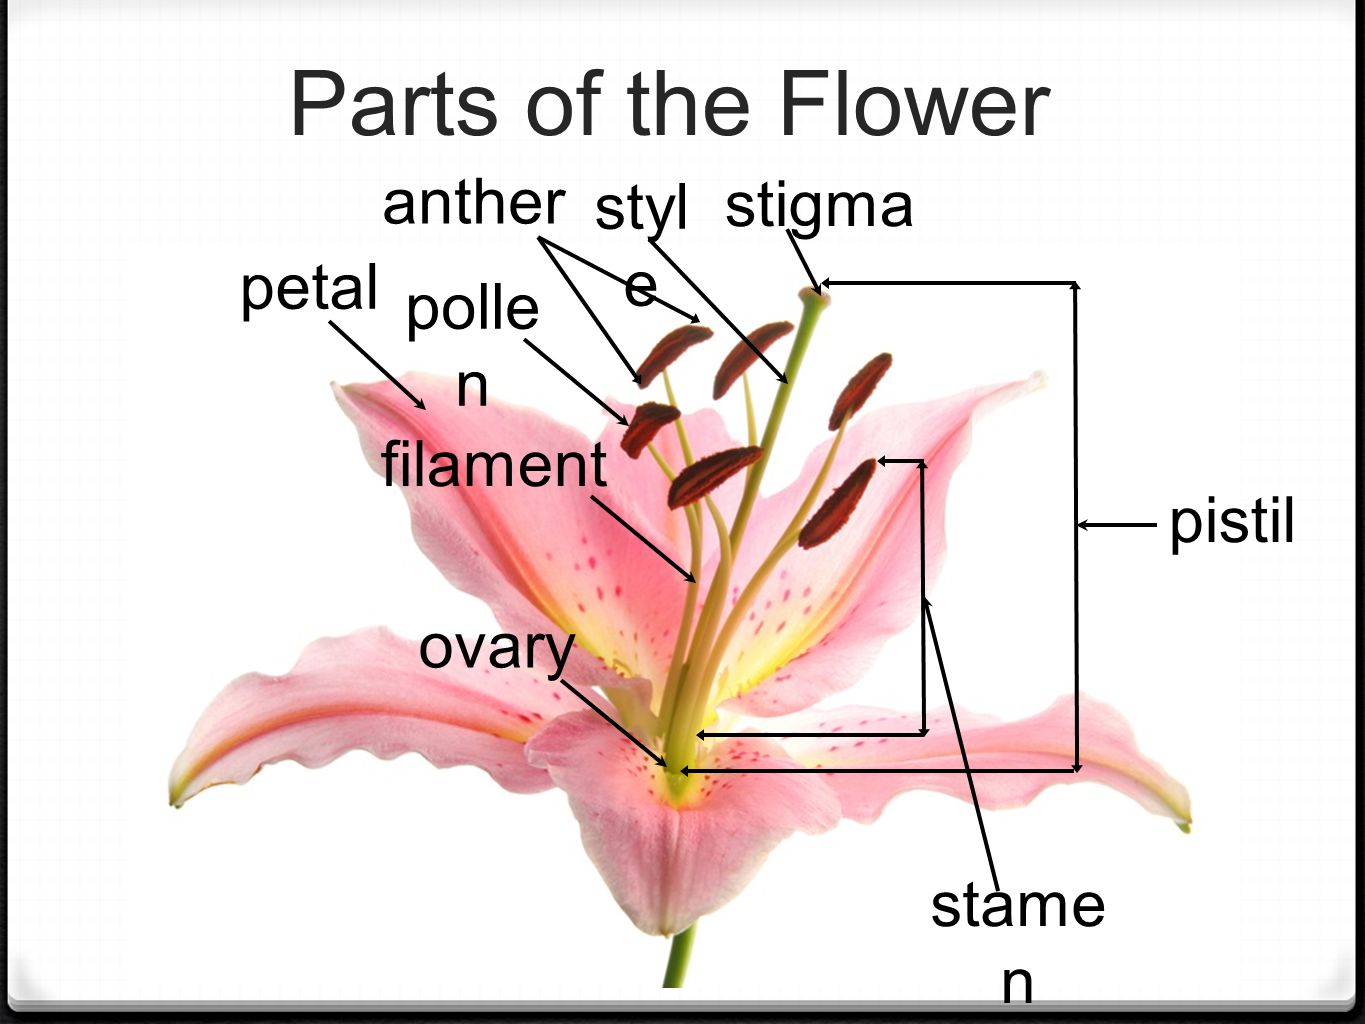 Parts of the Flower styl e stigma pistil stame n anther filament ovary petal polle n